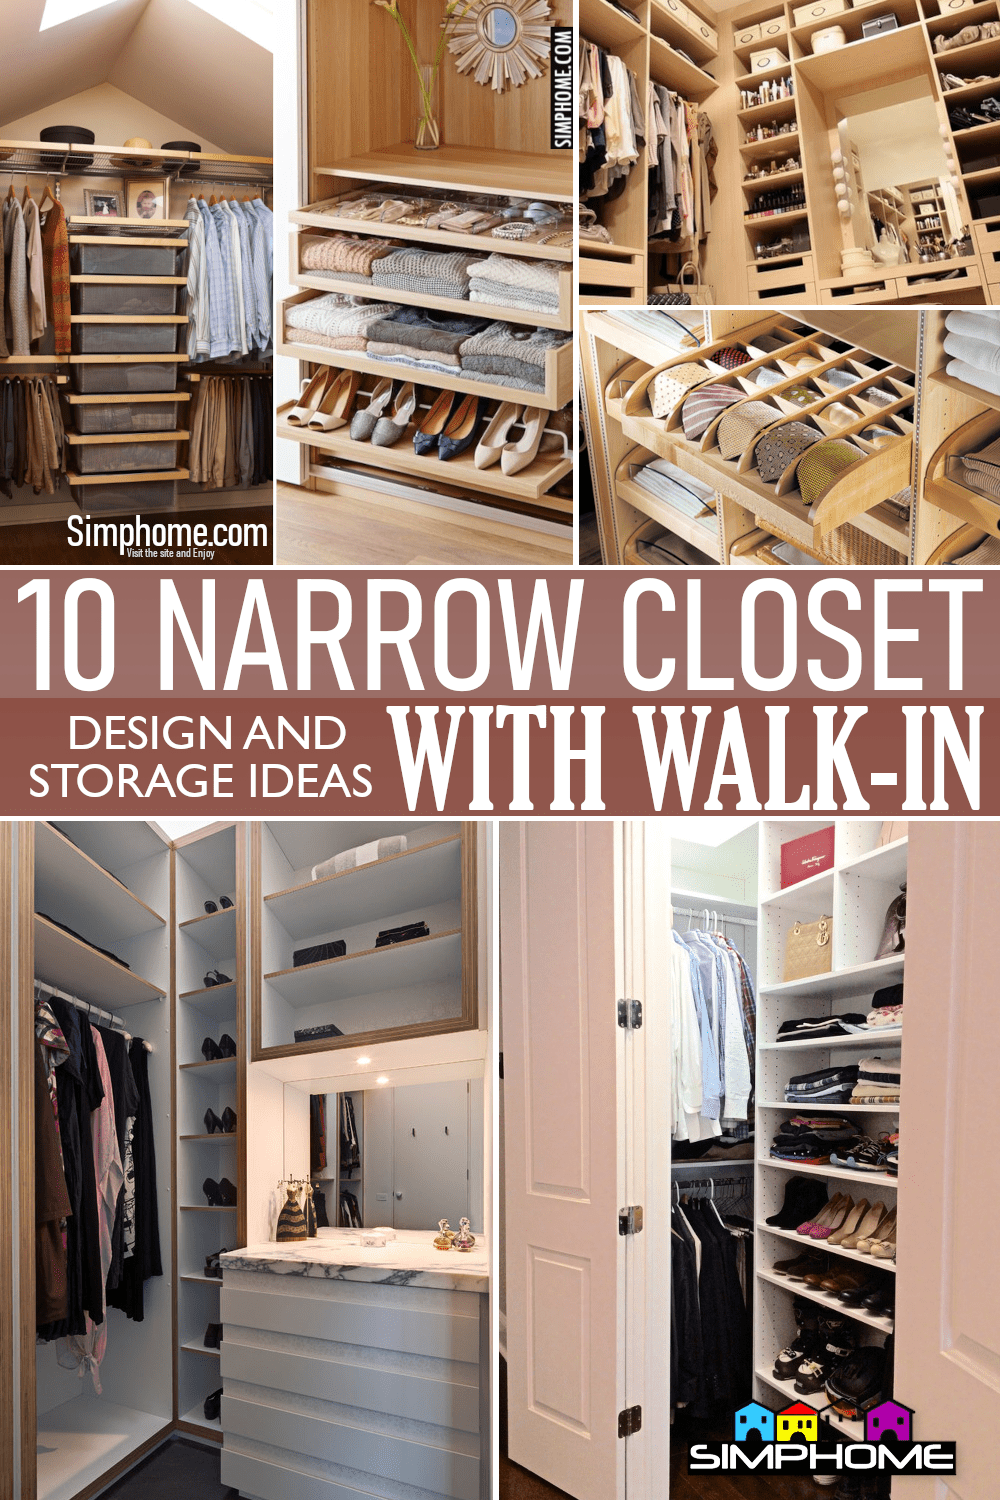 10 Narrow Closet Design and Storage Ideas with Walk in via Simphome.comFeatured